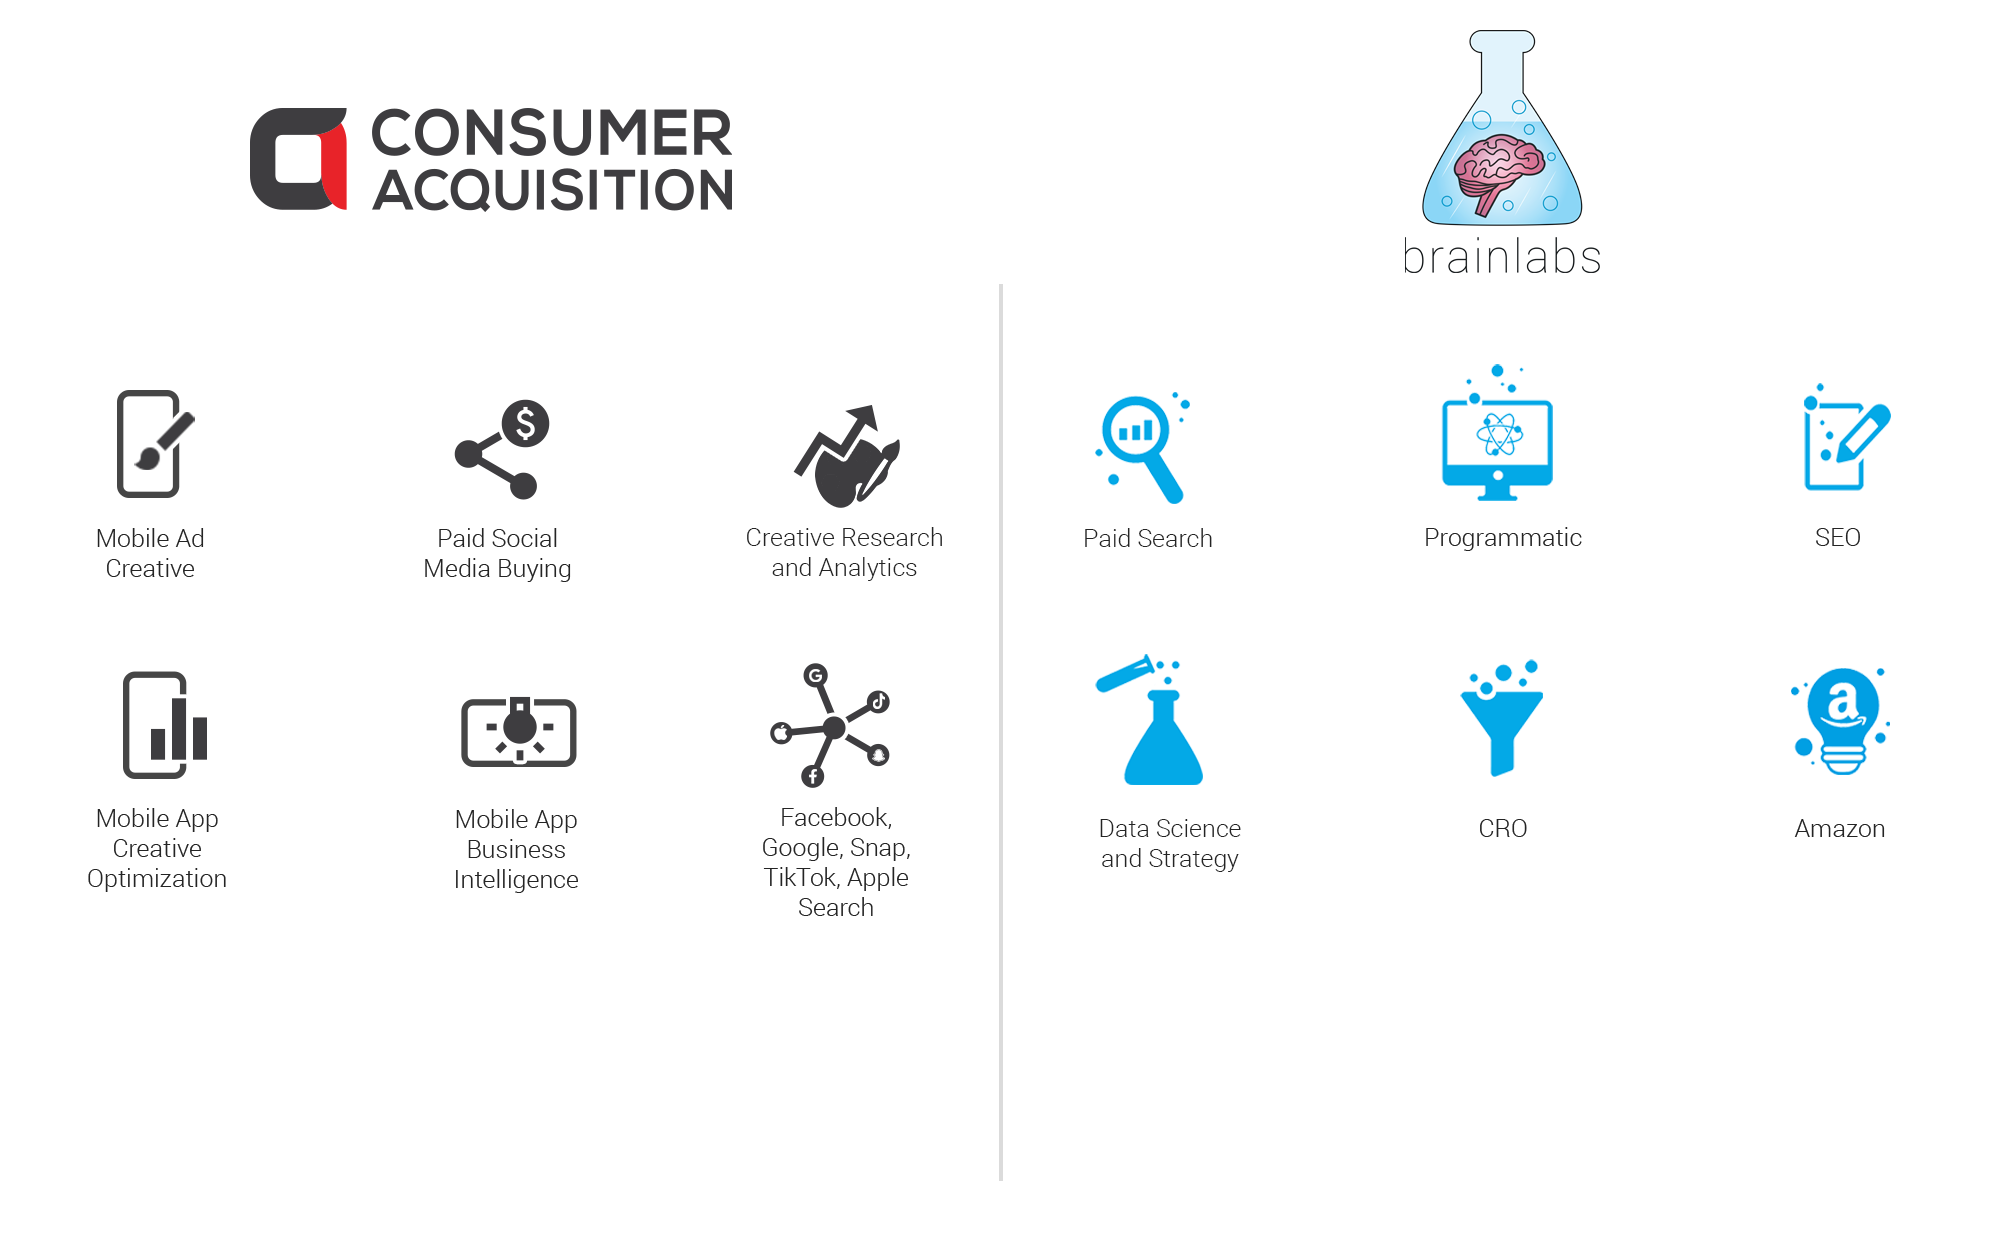 Consumer Acquisition acquired by Brainlabs